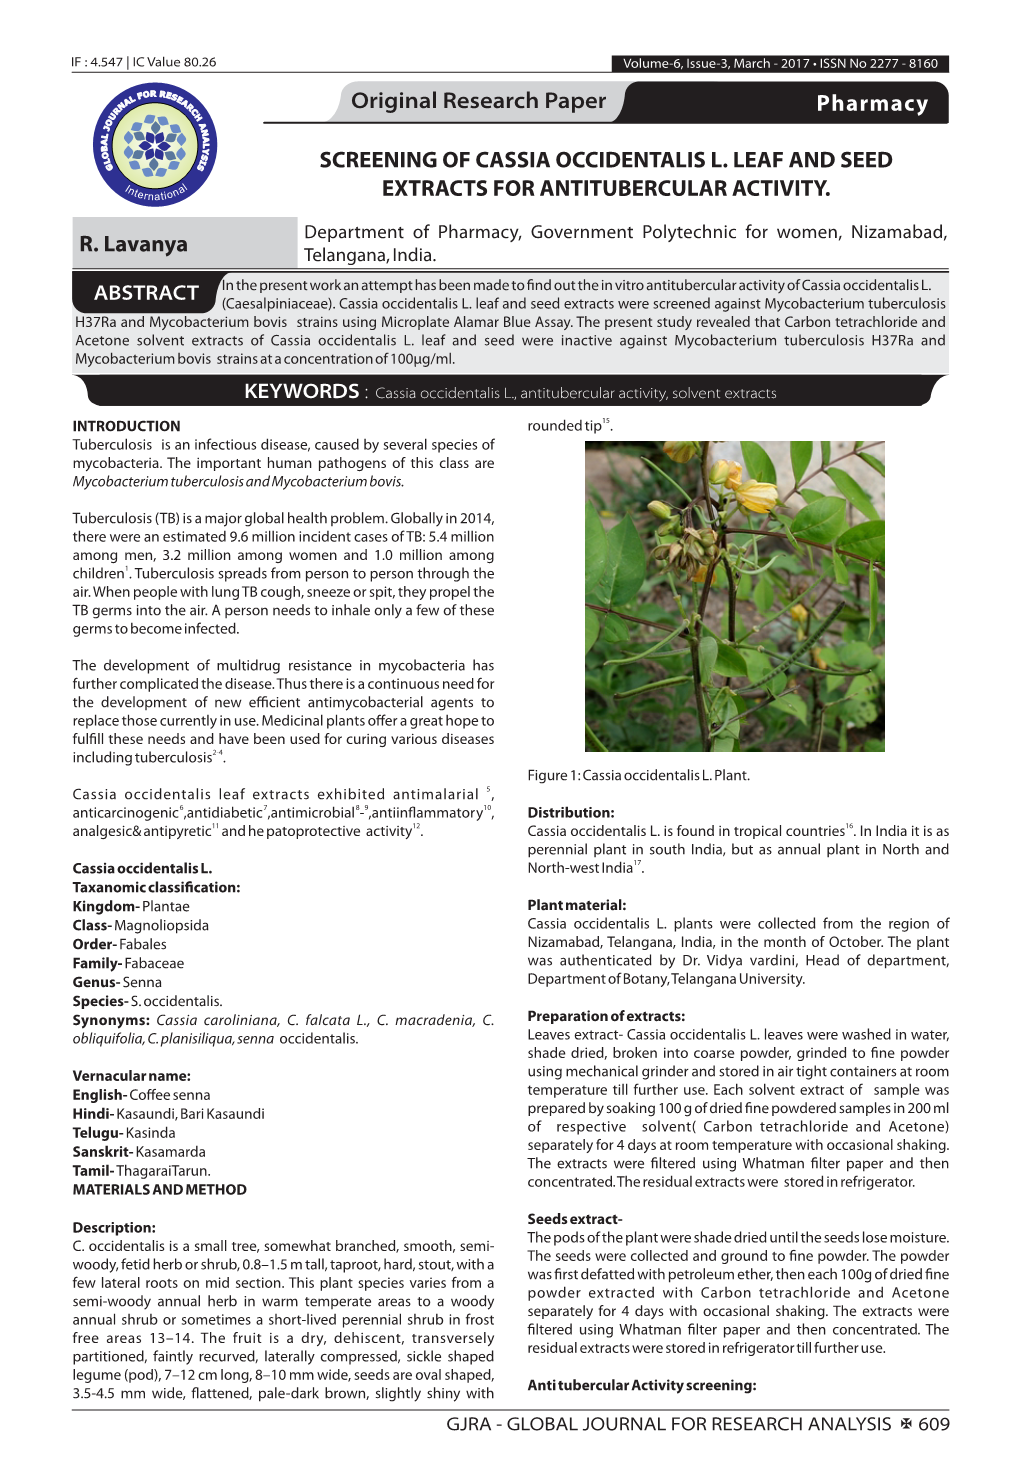 Screening of Cassia Occidentalis L. Leaf and Seed Extracts for Antitubercular Activity